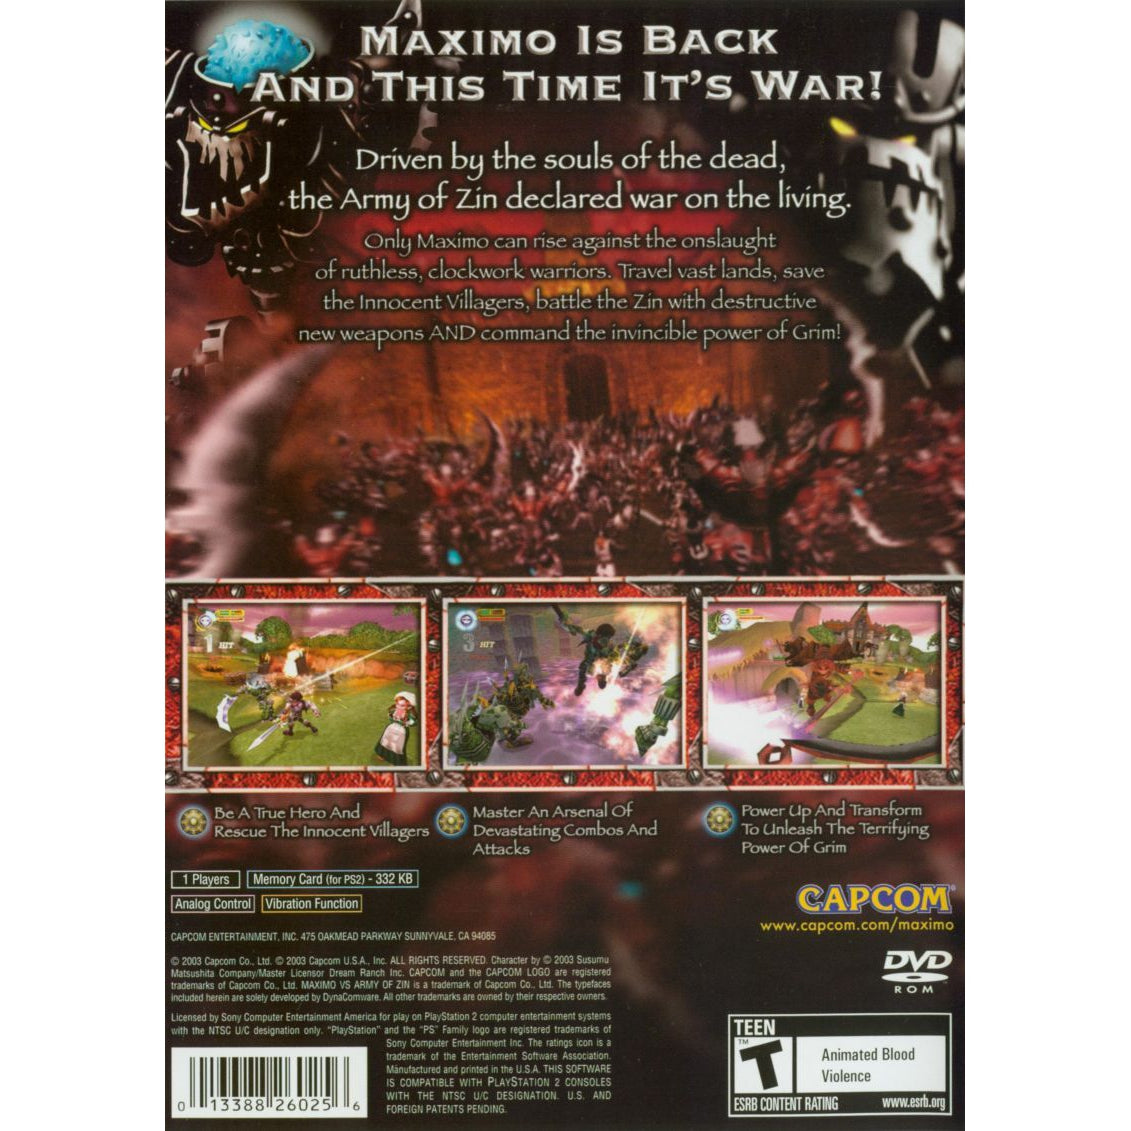 Maximo vs Army of Zin - PlayStation 2 (PS2) Game Complete - YourGamingShop.com - Buy, Sell, Trade Video Games Online. 120 Day Warranty. Satisfaction Guaranteed.